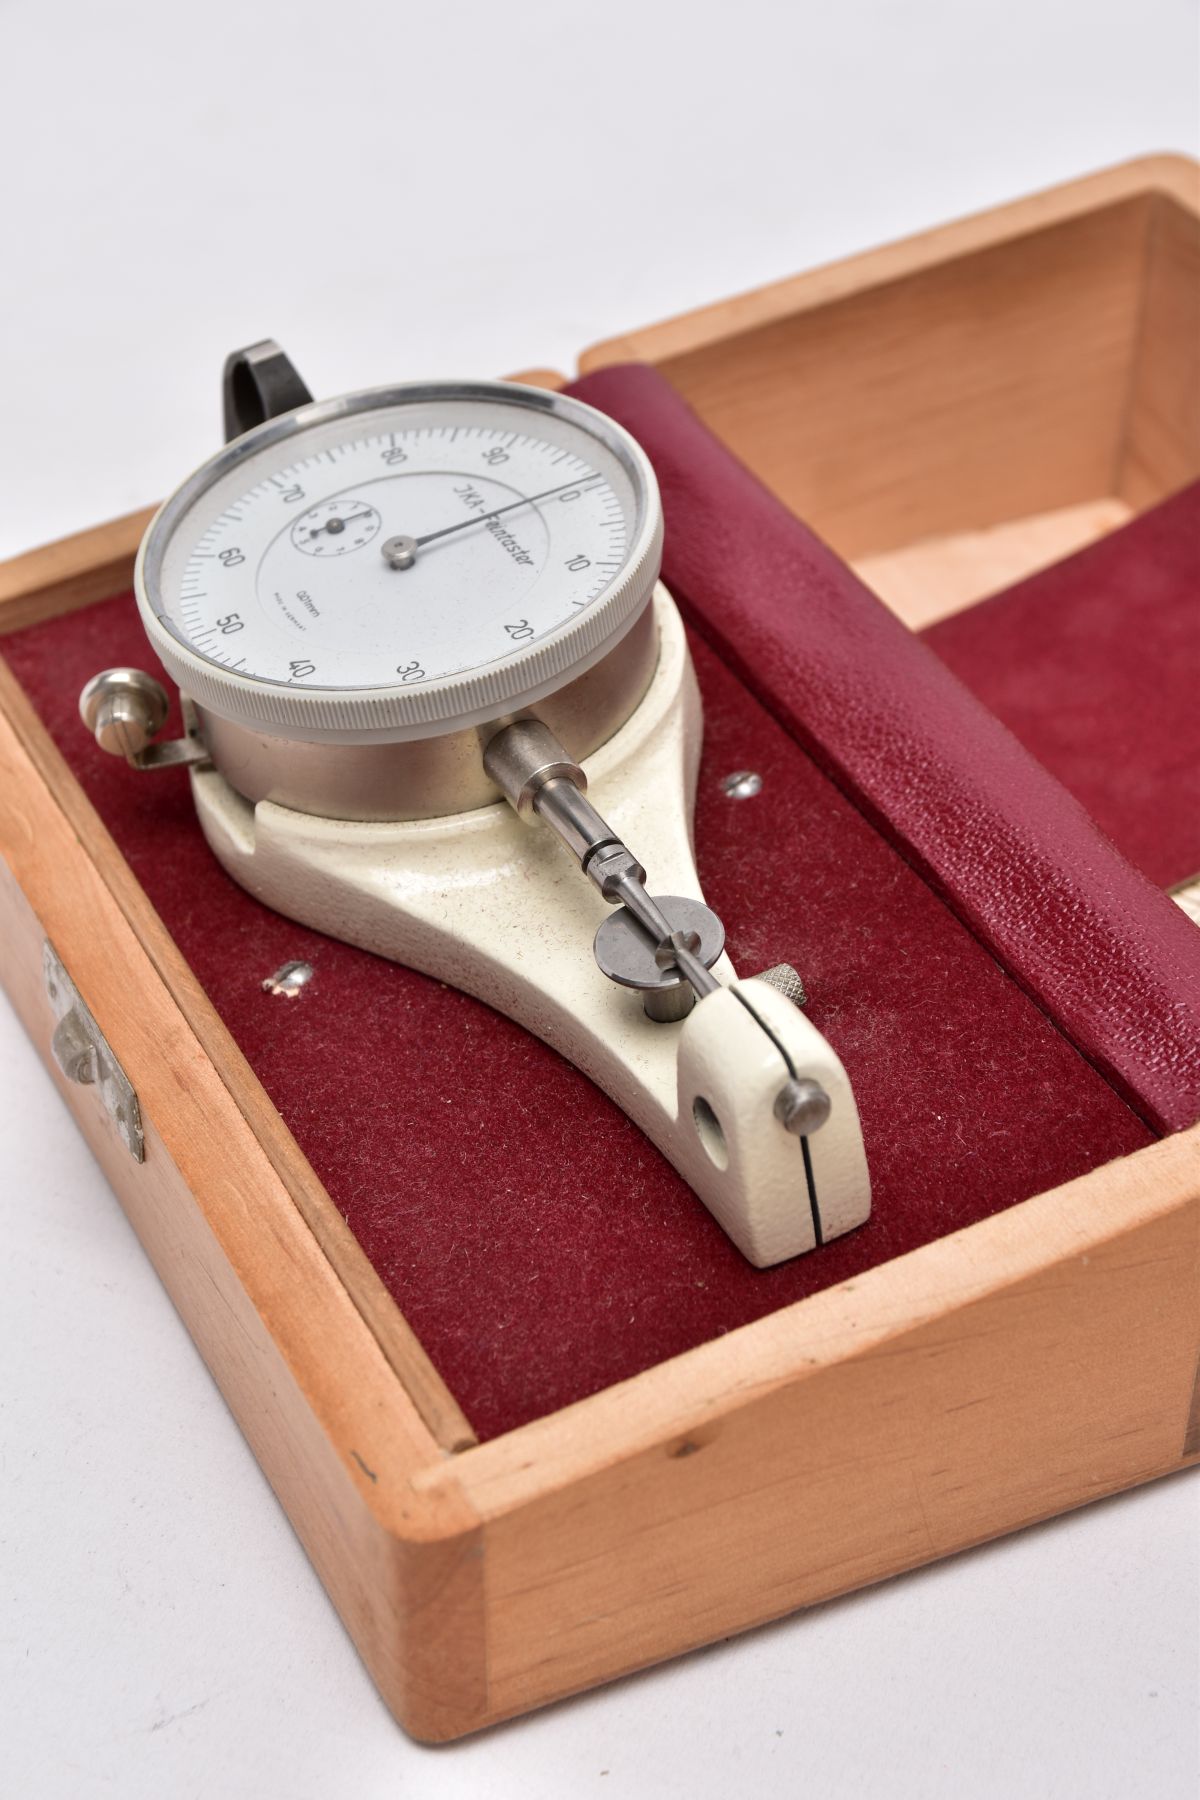 A 'JKA FEINTASTER' PRECISION MIRCOMETER DIAL GAUGE, fitted within original box - Image 10 of 12